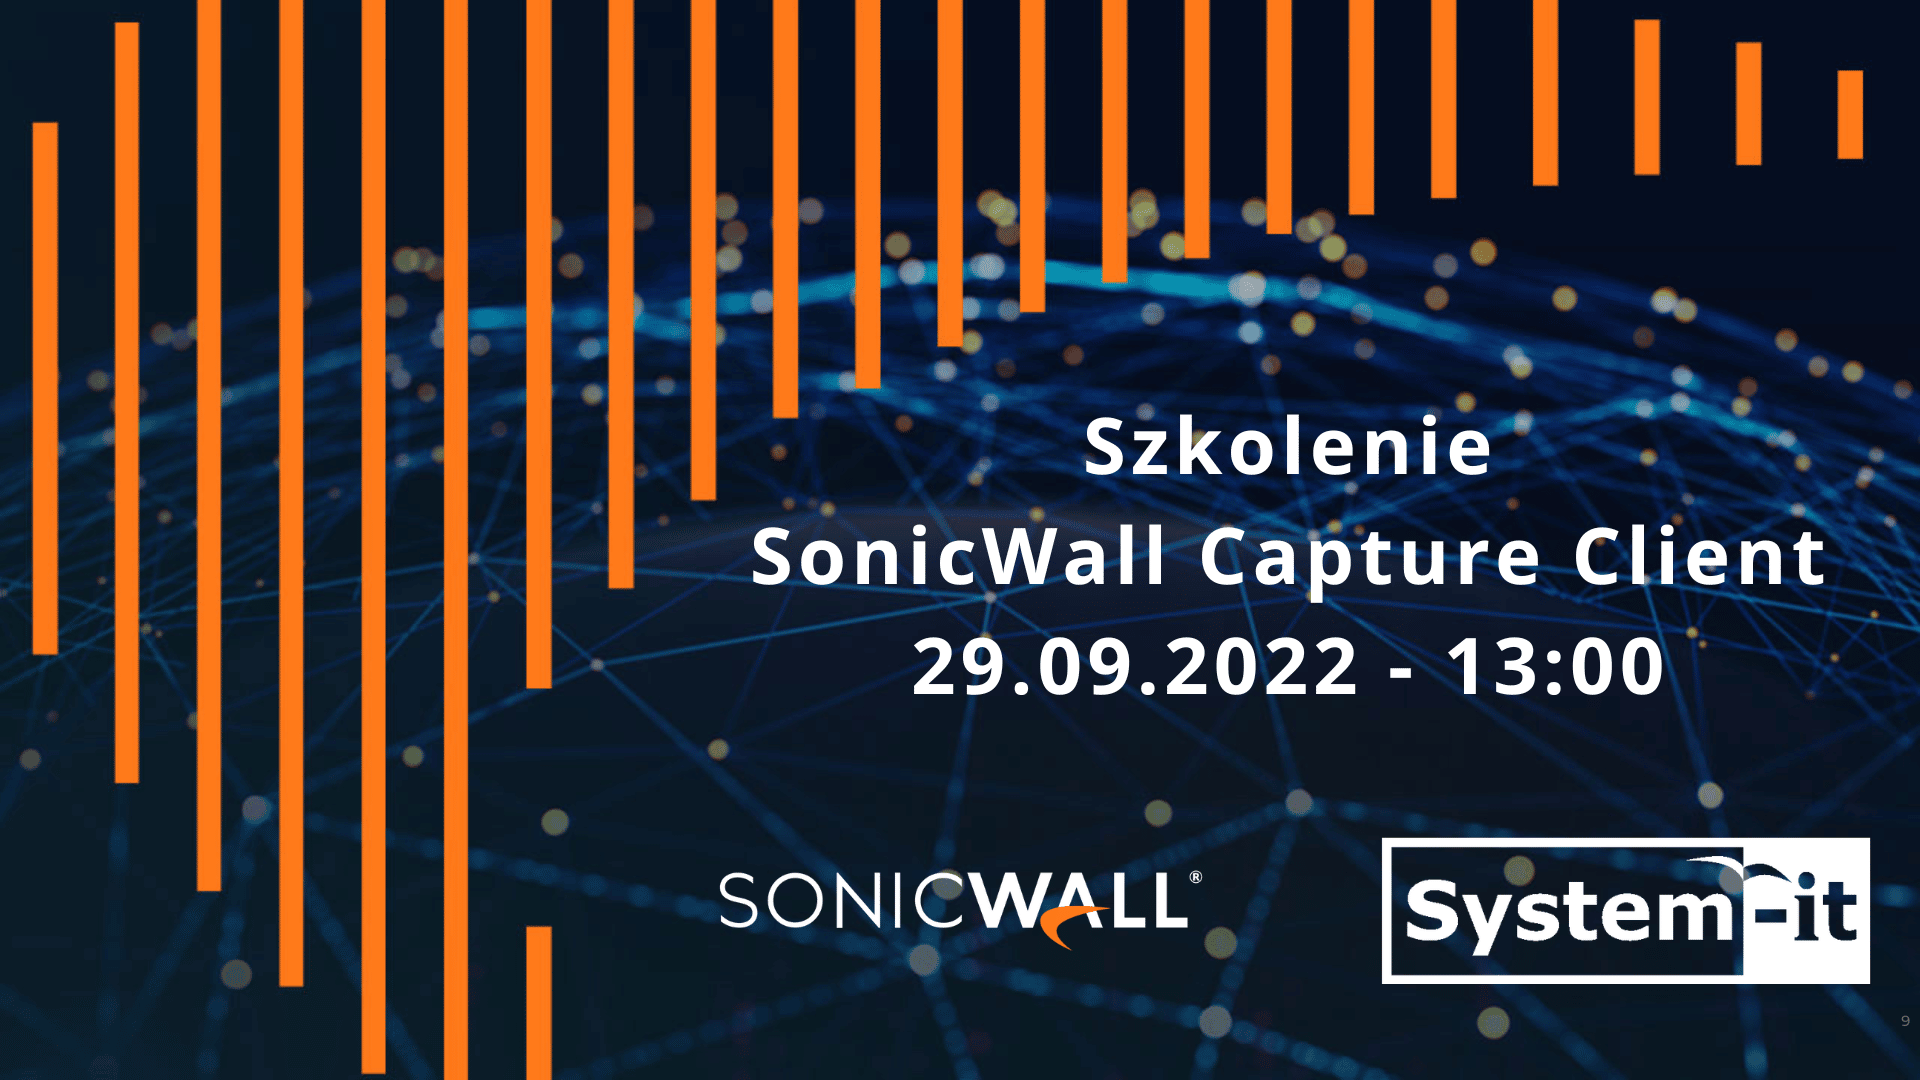 SonicWall Capture Client - EDR